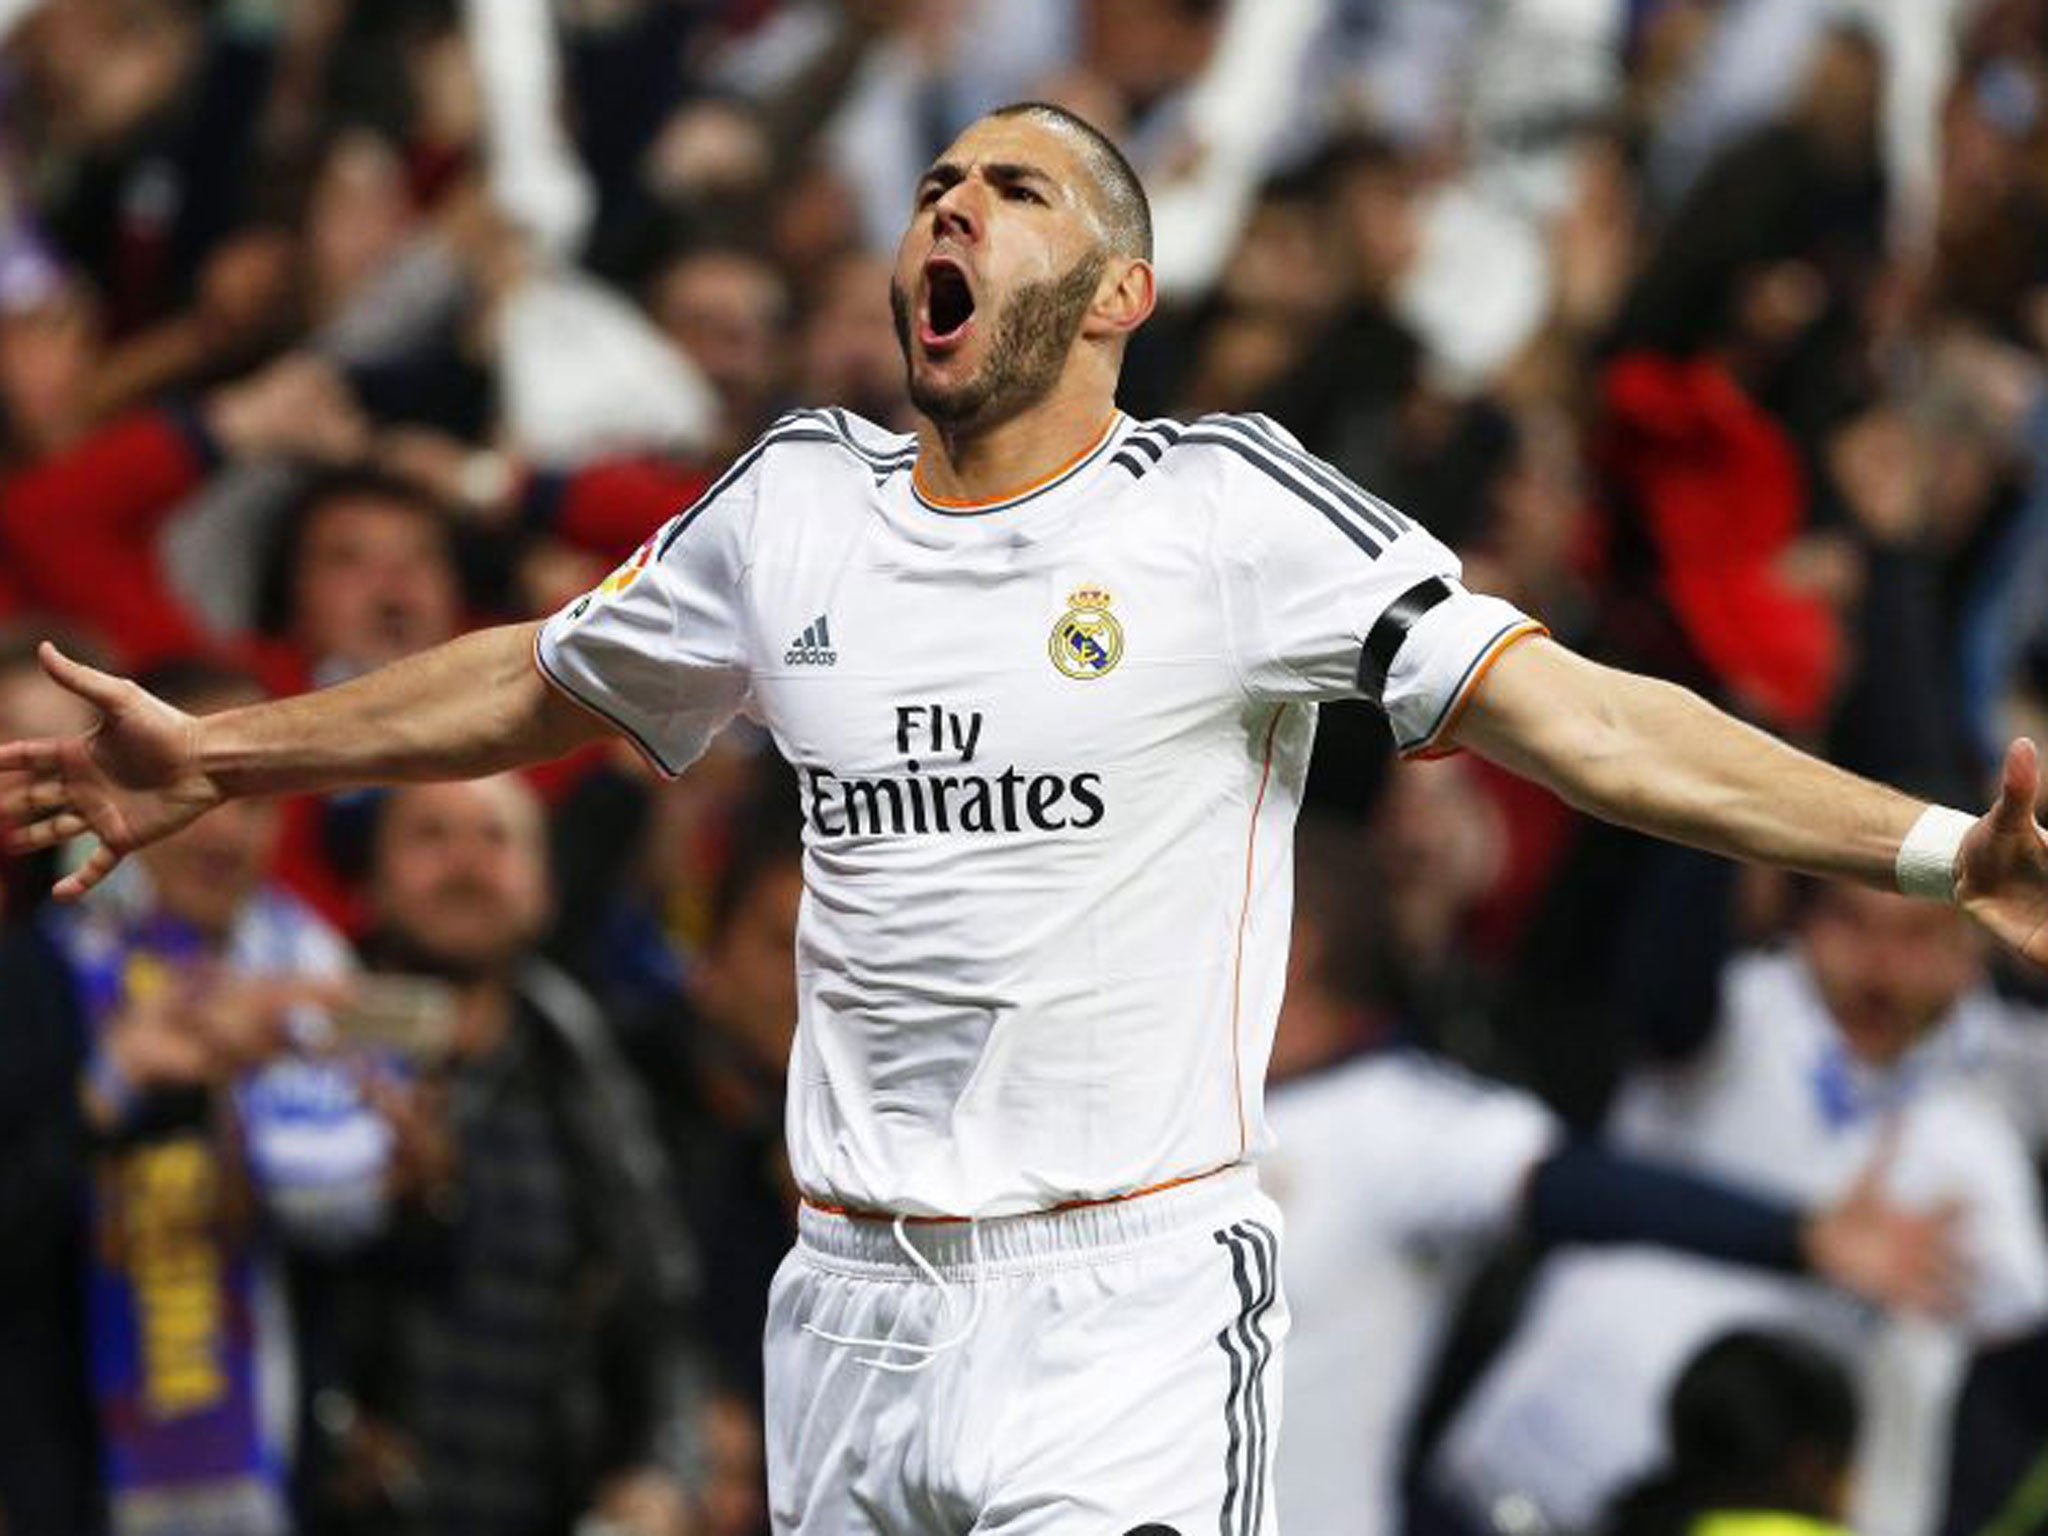 Karim Benzema celebrates his first goal of the game for Real Madrid